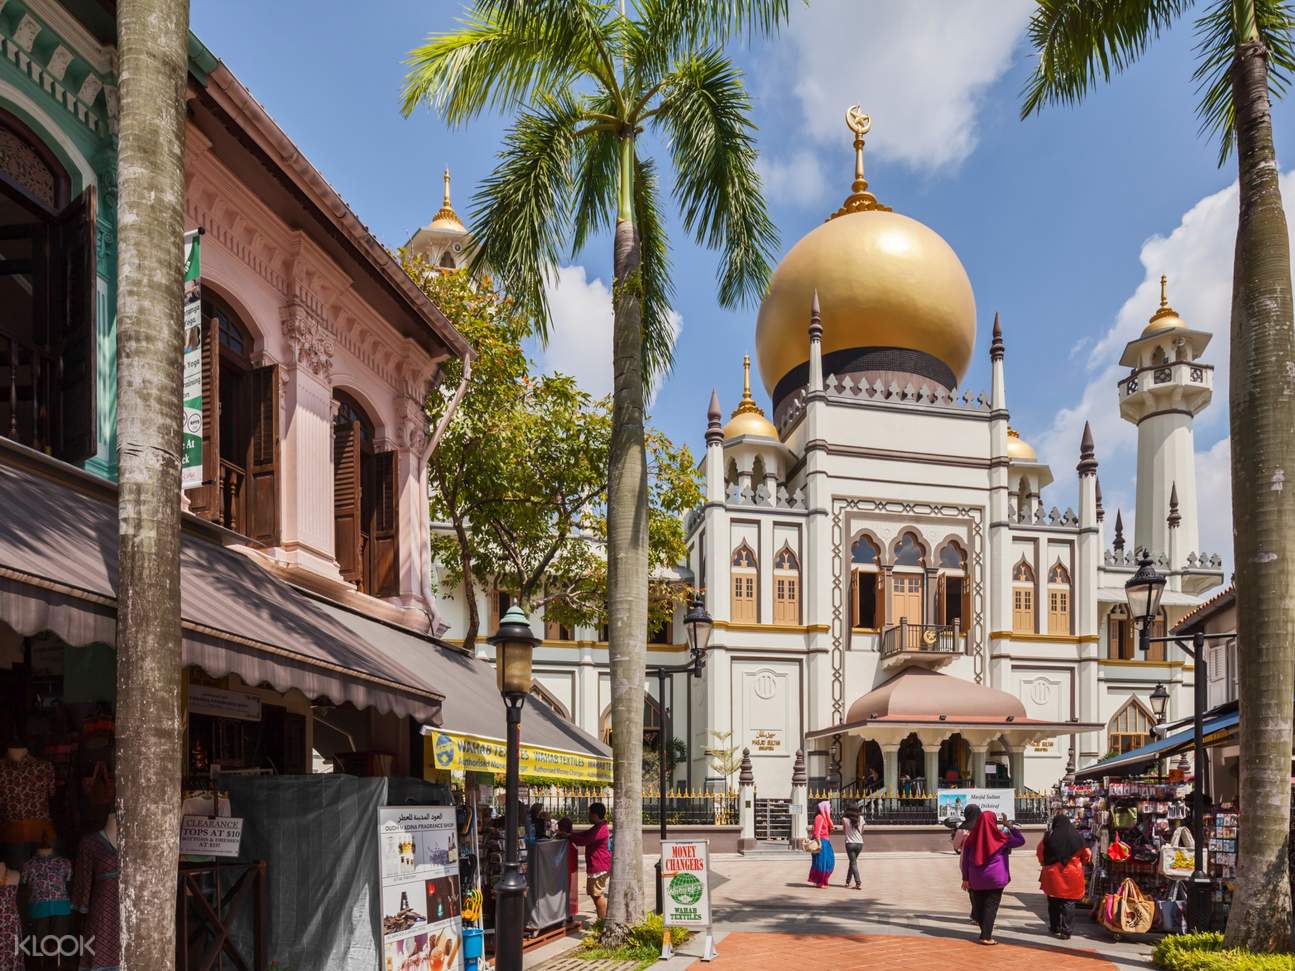 kampong glam tourist attraction